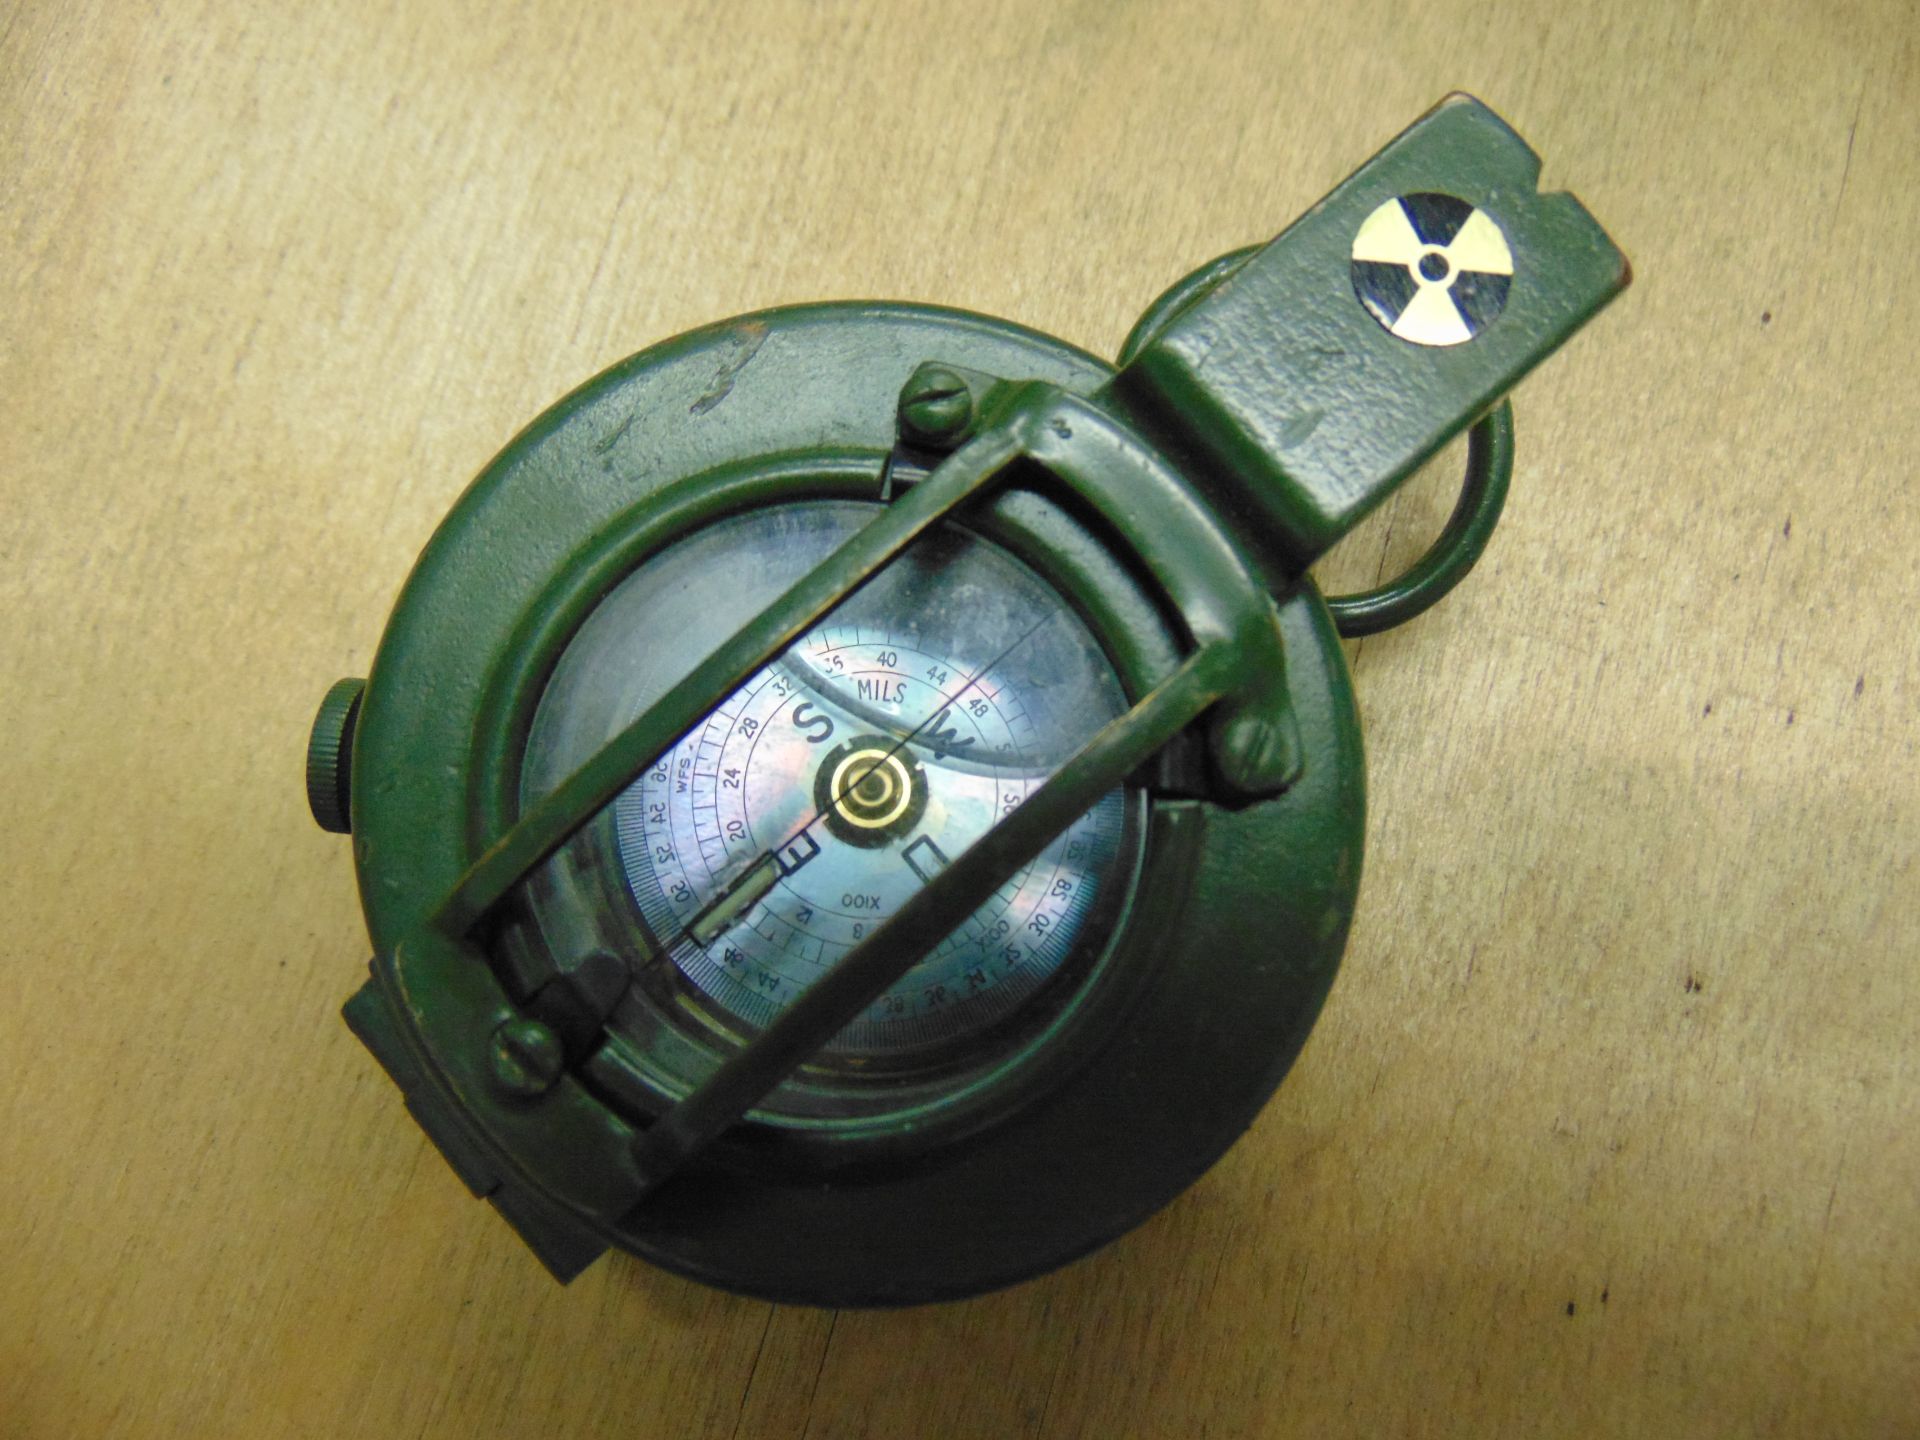 Genuine British Army Stanley Prismatic Marching Compass - Image 3 of 4